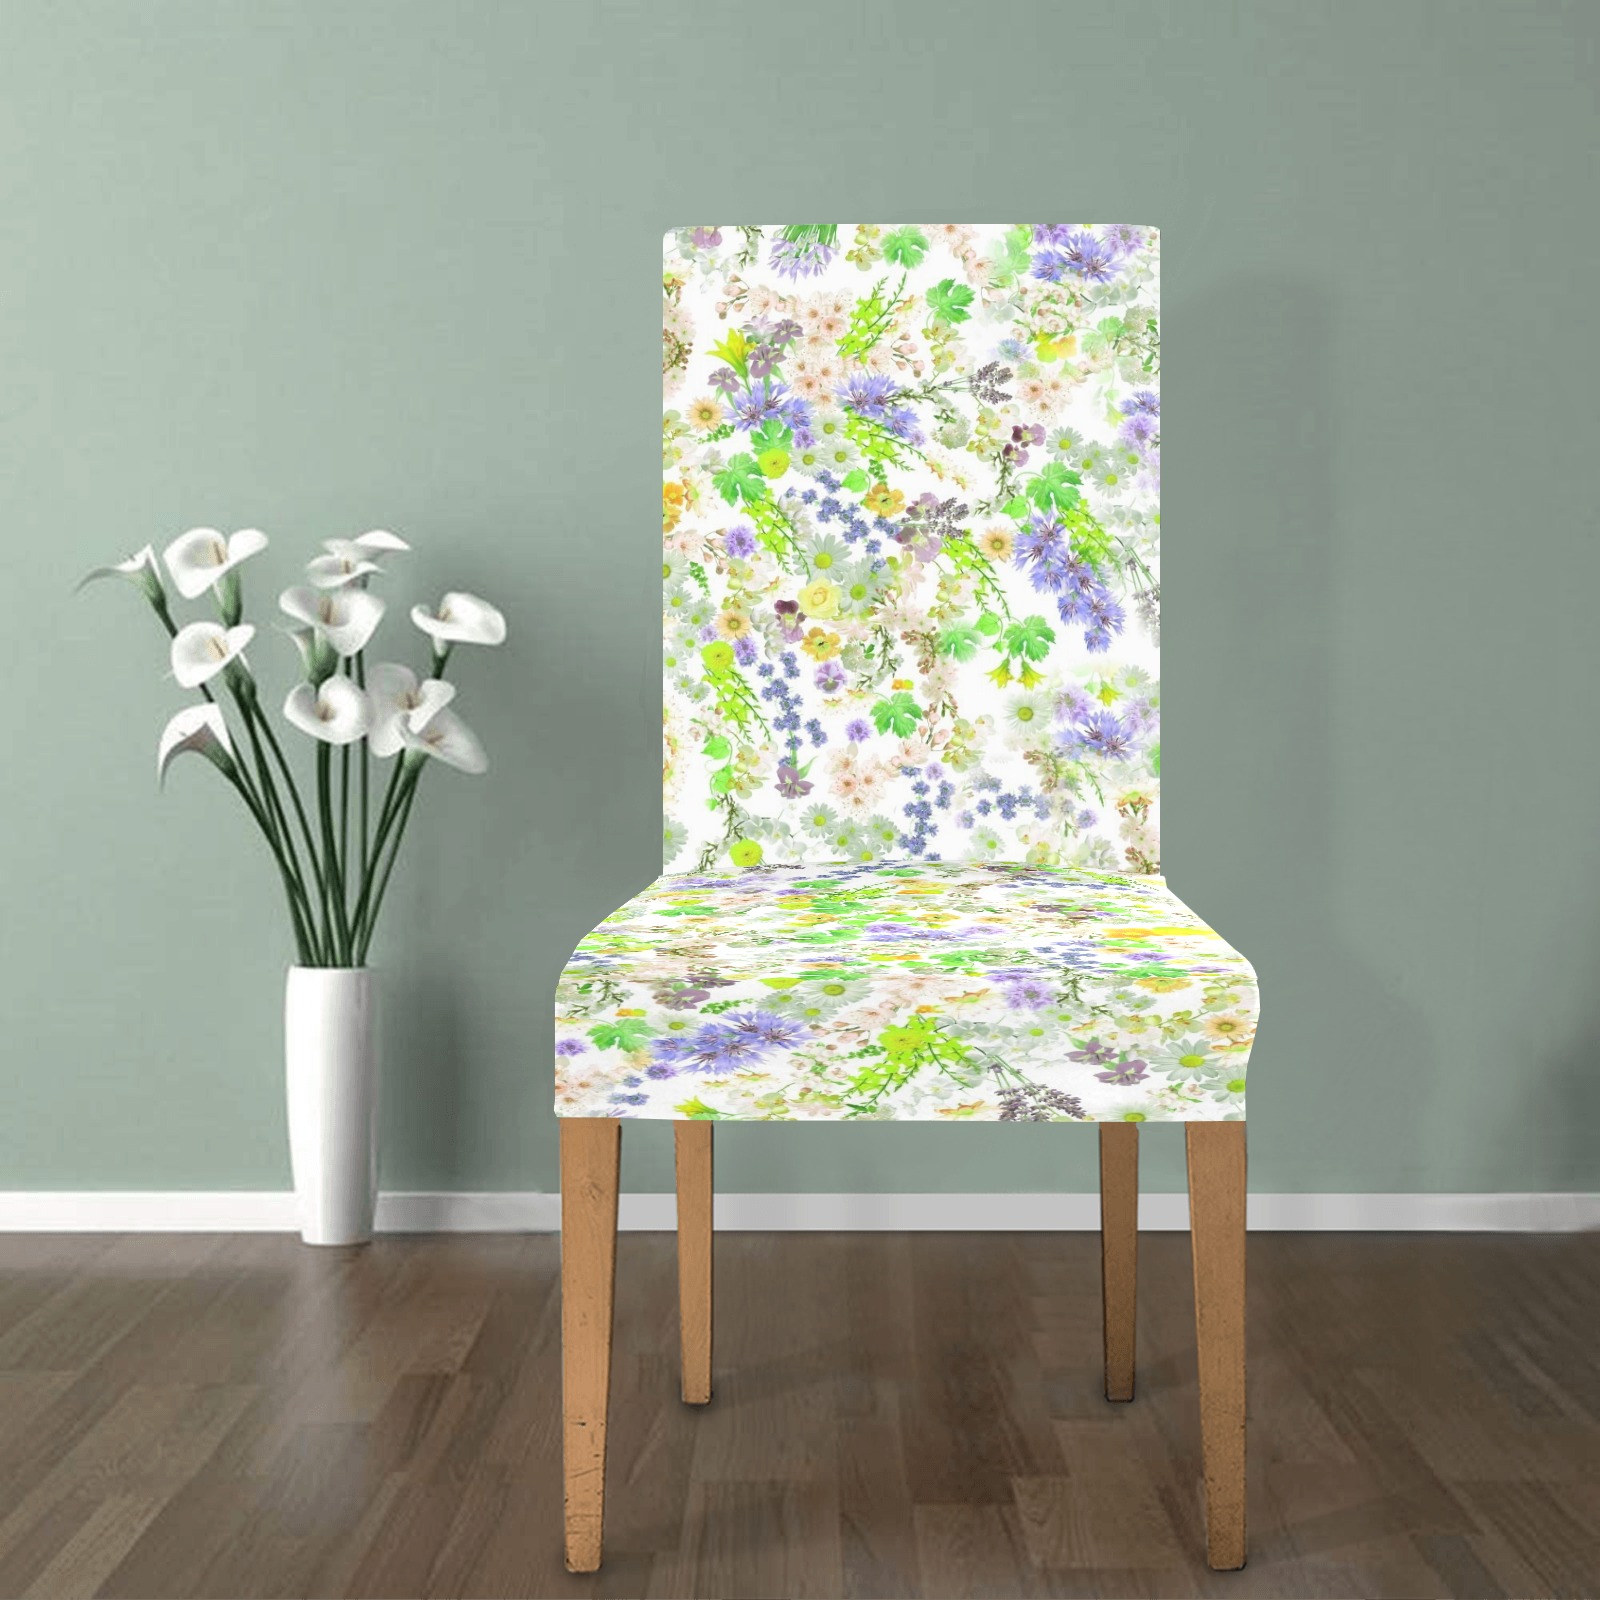 floral design 5 Chair Cover (Pack of 4)